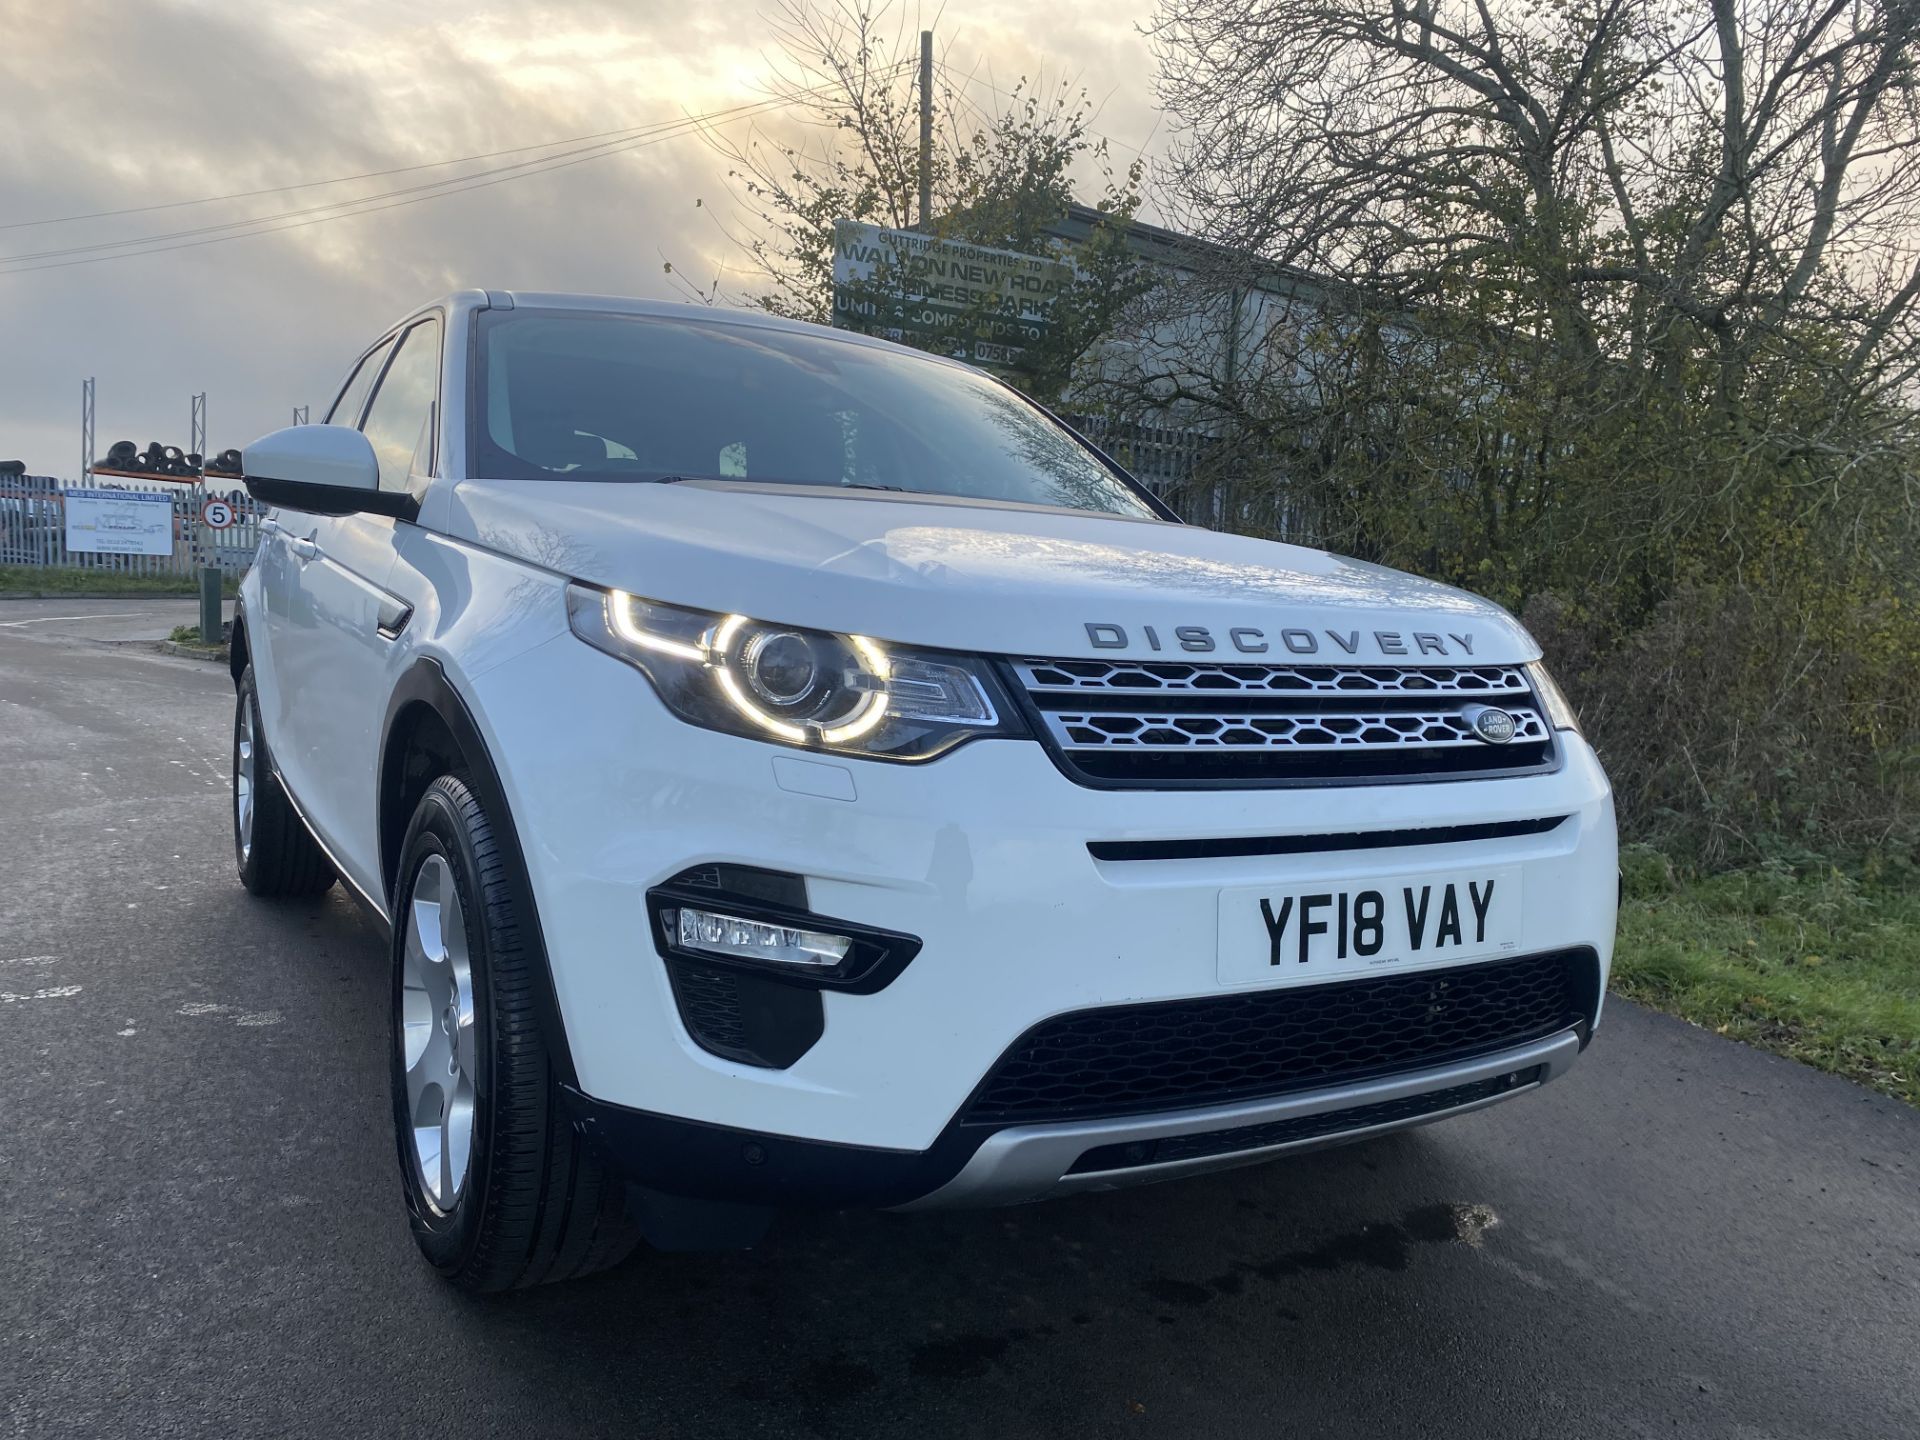 (ON SALE) LANDROVER DISCOVERY SPORT "HSE" 18 REG - 1 OWNER - LEATHER PANORAMIC ROOF - FULLY LOADED - - Image 3 of 37